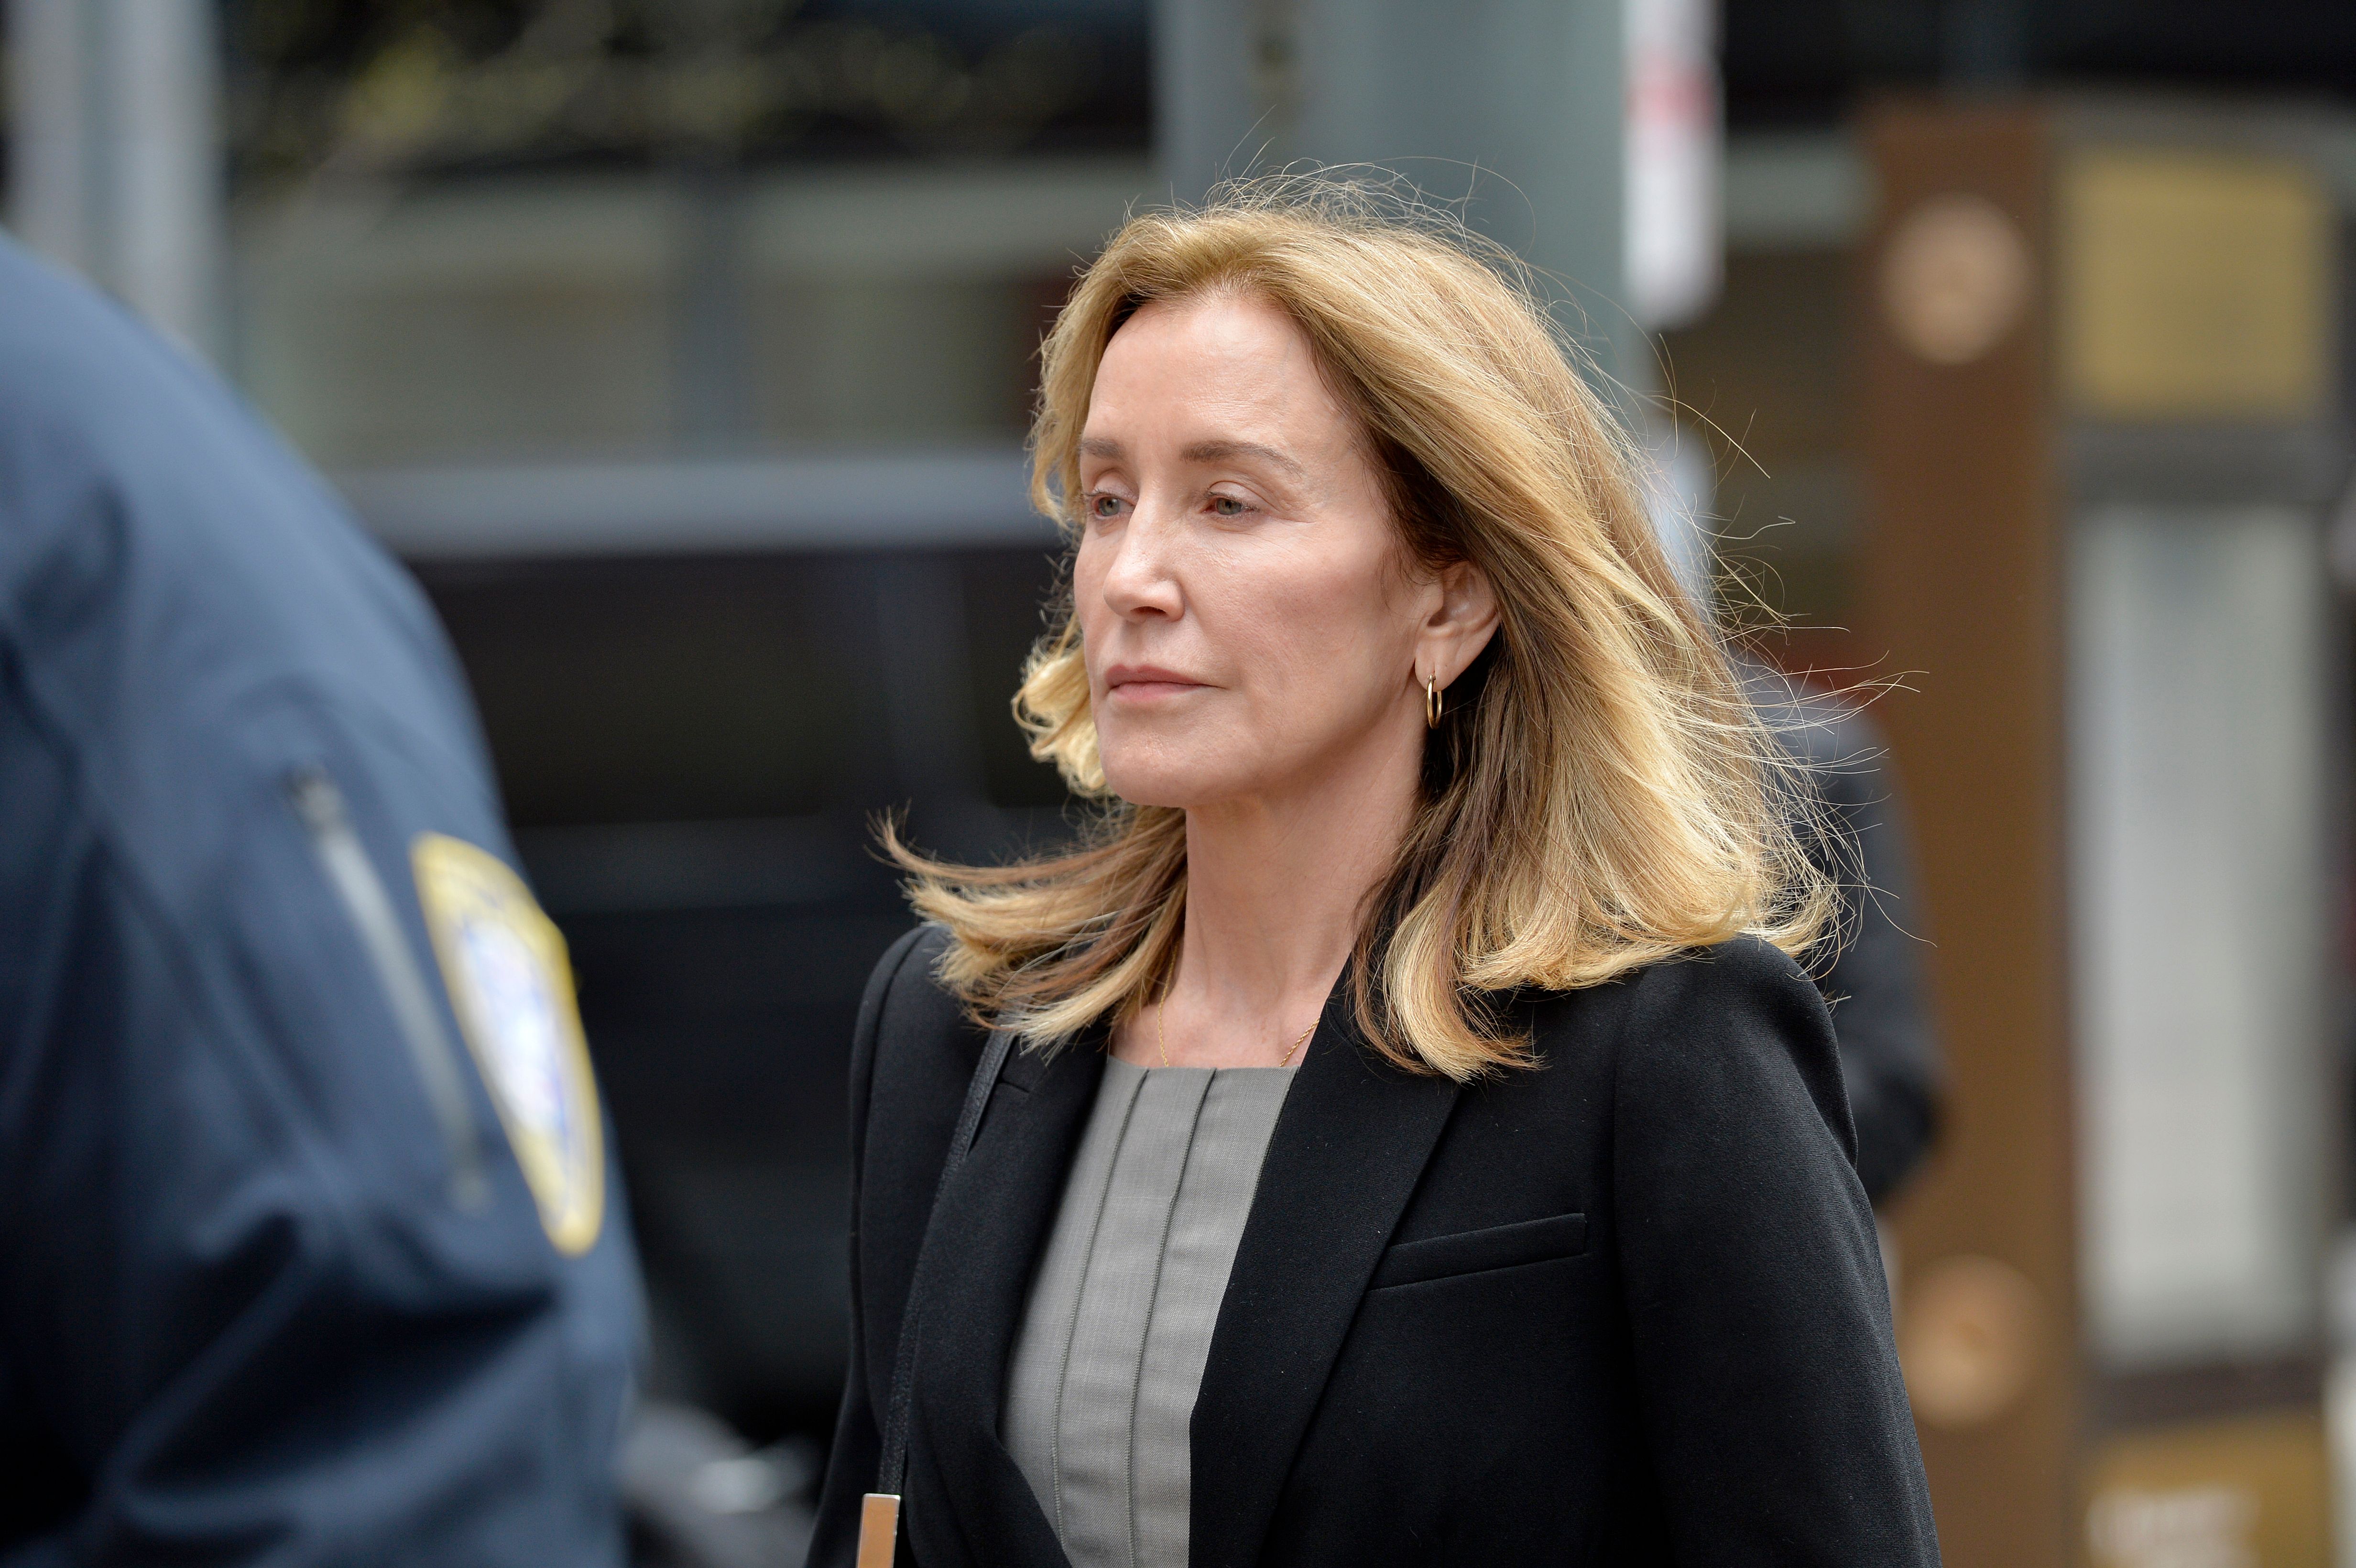 Felicity Huffman is escorted by Police into court on May 13, 2019 in Boston, Massachusetts. | Source: Getty Images